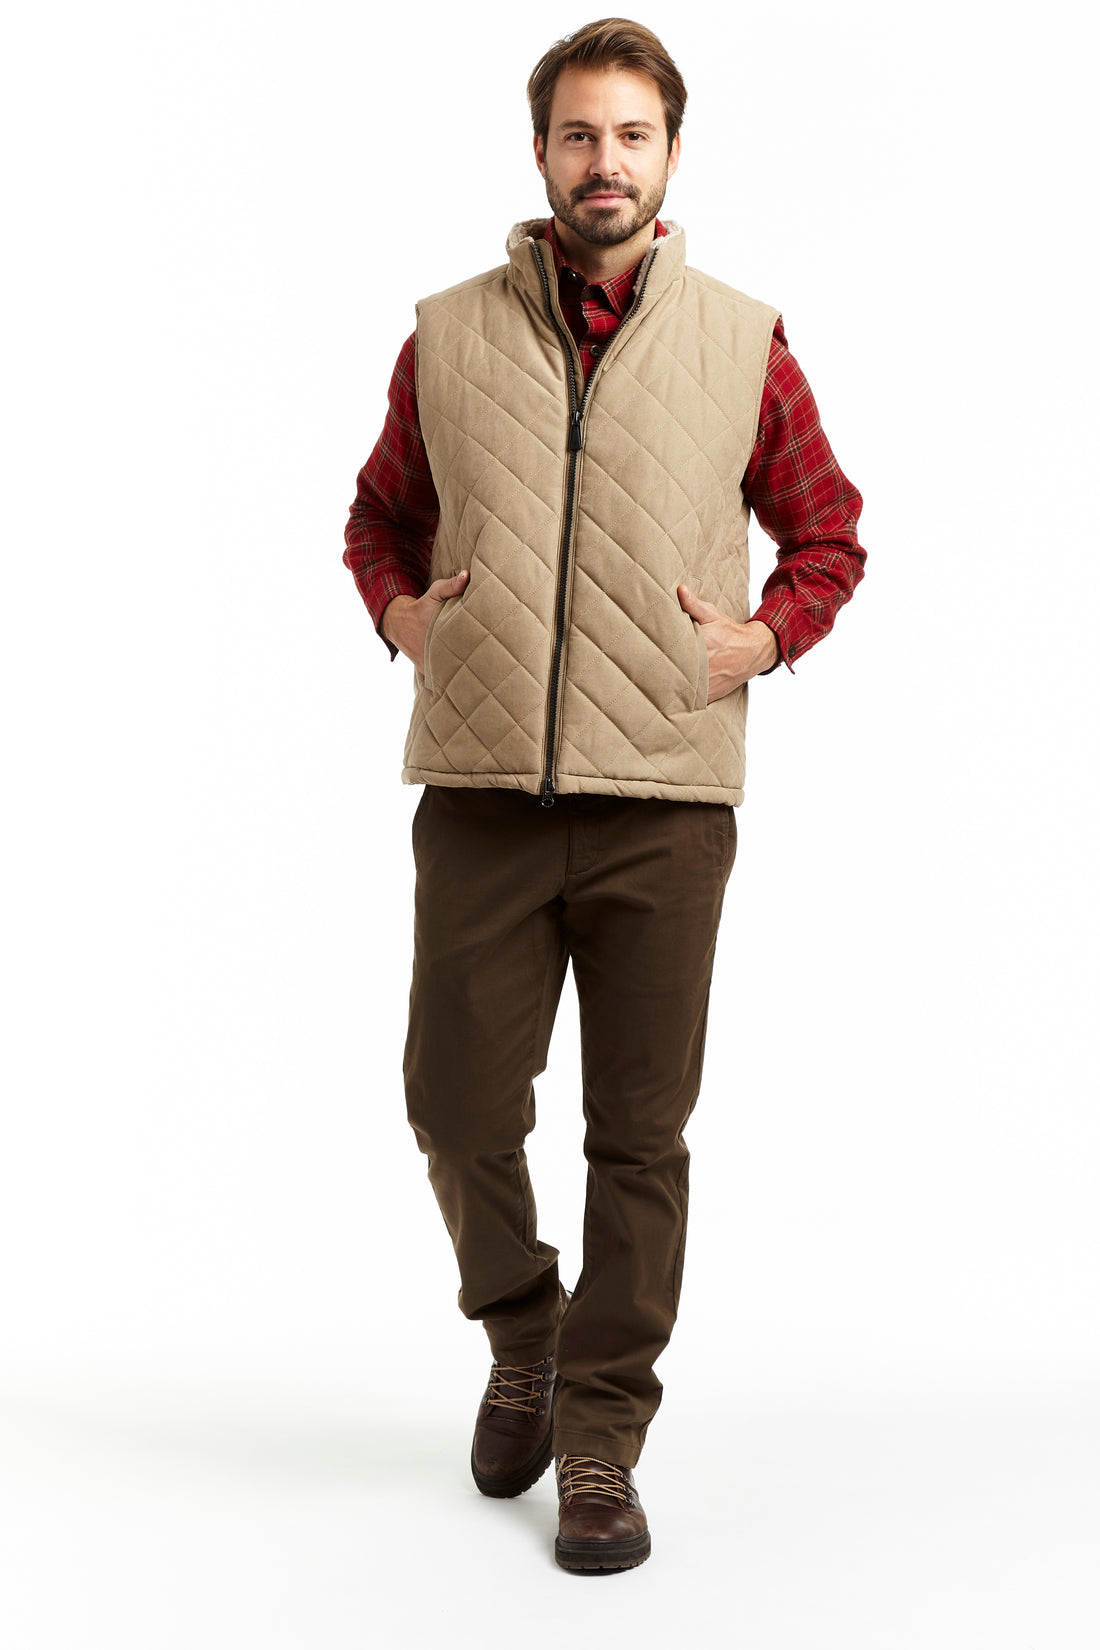 MICRO OXFORD with SHERPA LINED VEST